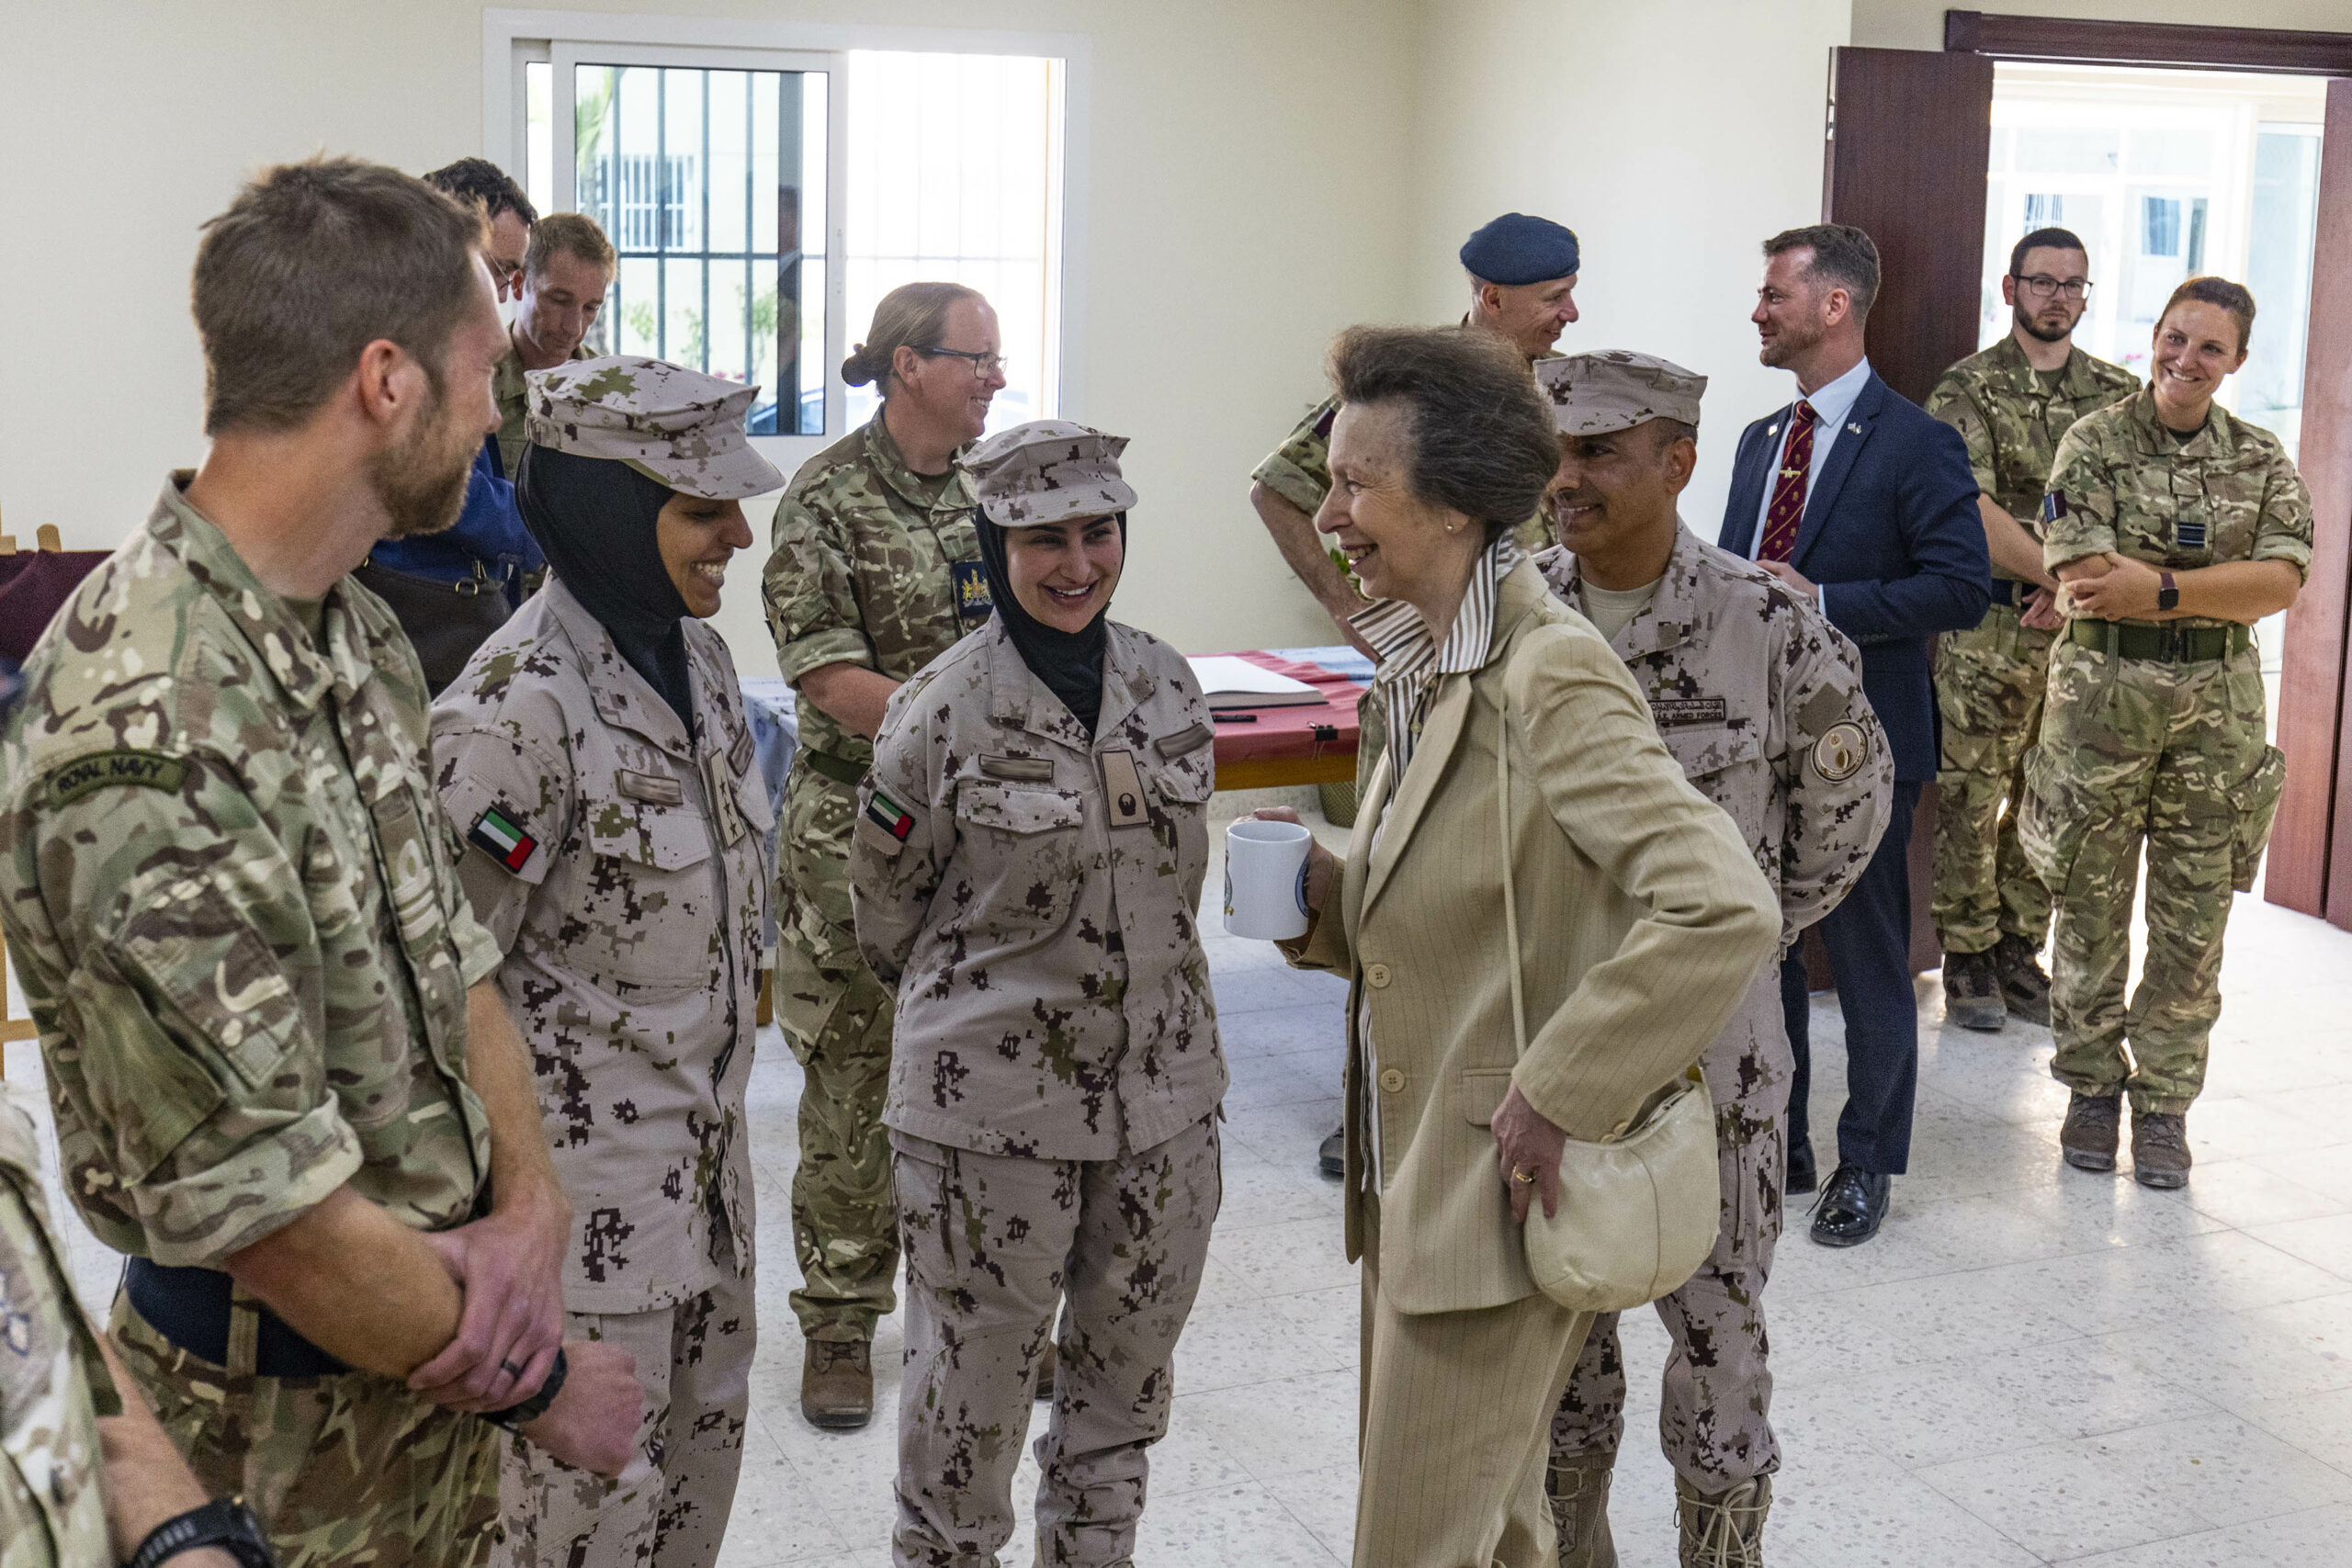 On 1 March 2024, Her Royal Highness (HRH) The Princess Royal officially opened a permanent UK military facility at Al-Minhad Air Base in the United Arab Emirates. The new HQ, accommodation and welfare facility is called Donnelly Lines, aft Sgt Donnelly who died in Feb 1943 in Furijarah after the crew of an RAF Wellington Bomber crash landed.The facility demonstrates the UK and RAF commitment to the UAE and the region as we stand side by side to work for peace and stability in the region. The UAE and the UK have a long and shared history and this development is the next step of that bilateral friendship.